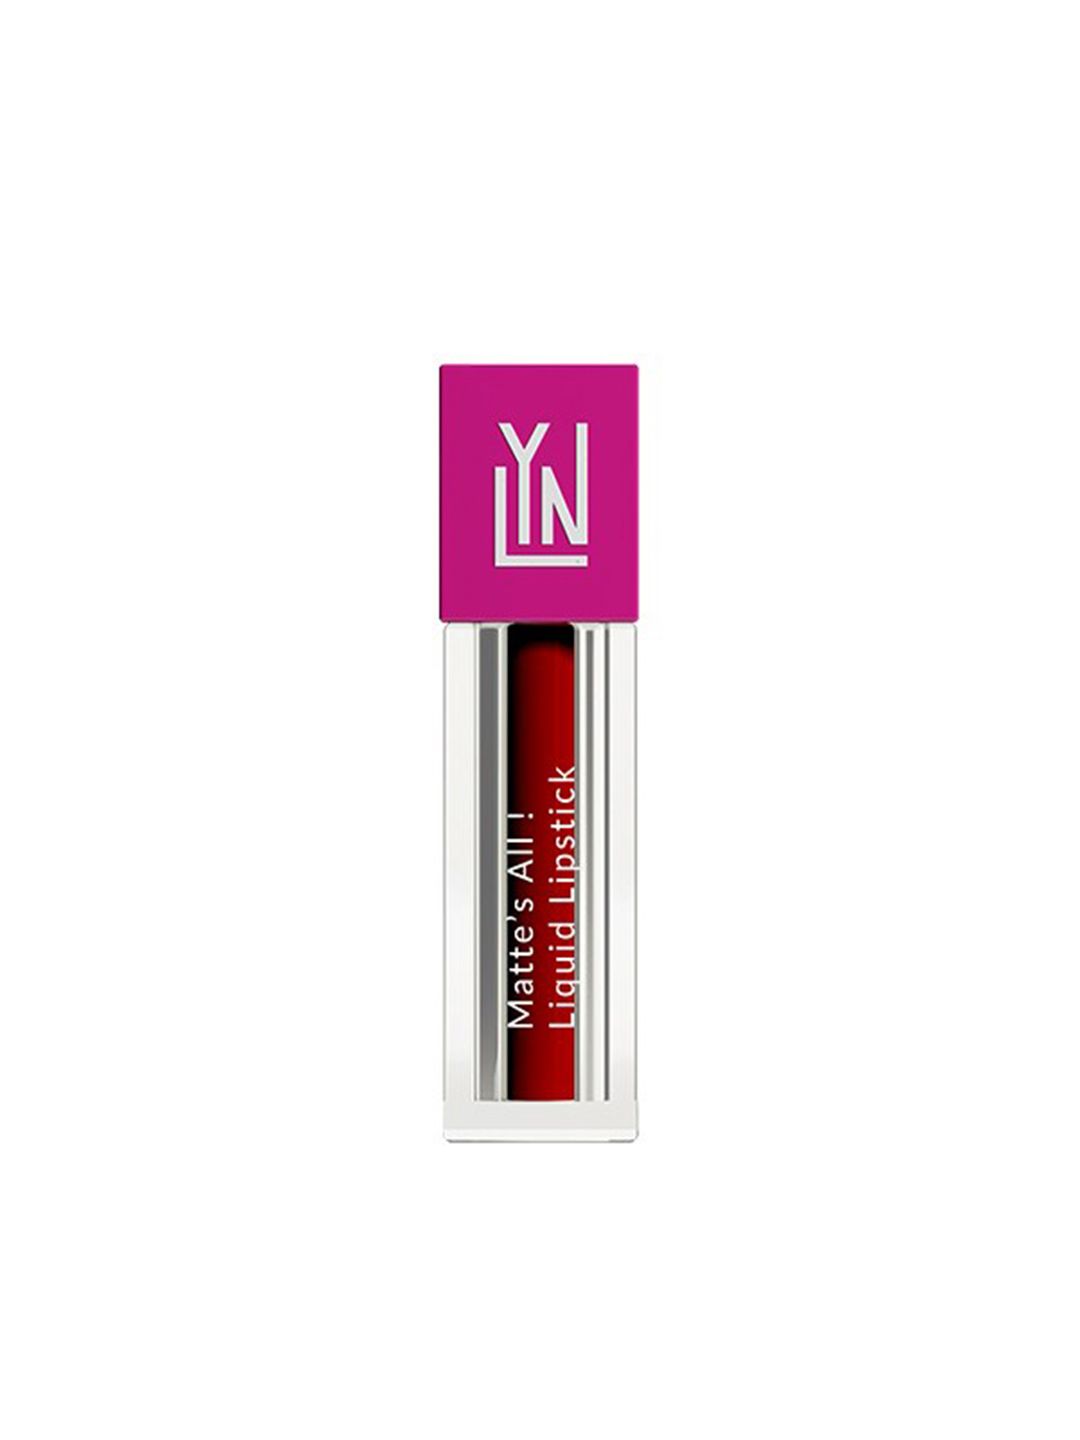 LYN LIVE YOUR NOW  Matte Liquid Lipstick 1 ml -Born Red-dy Price in India